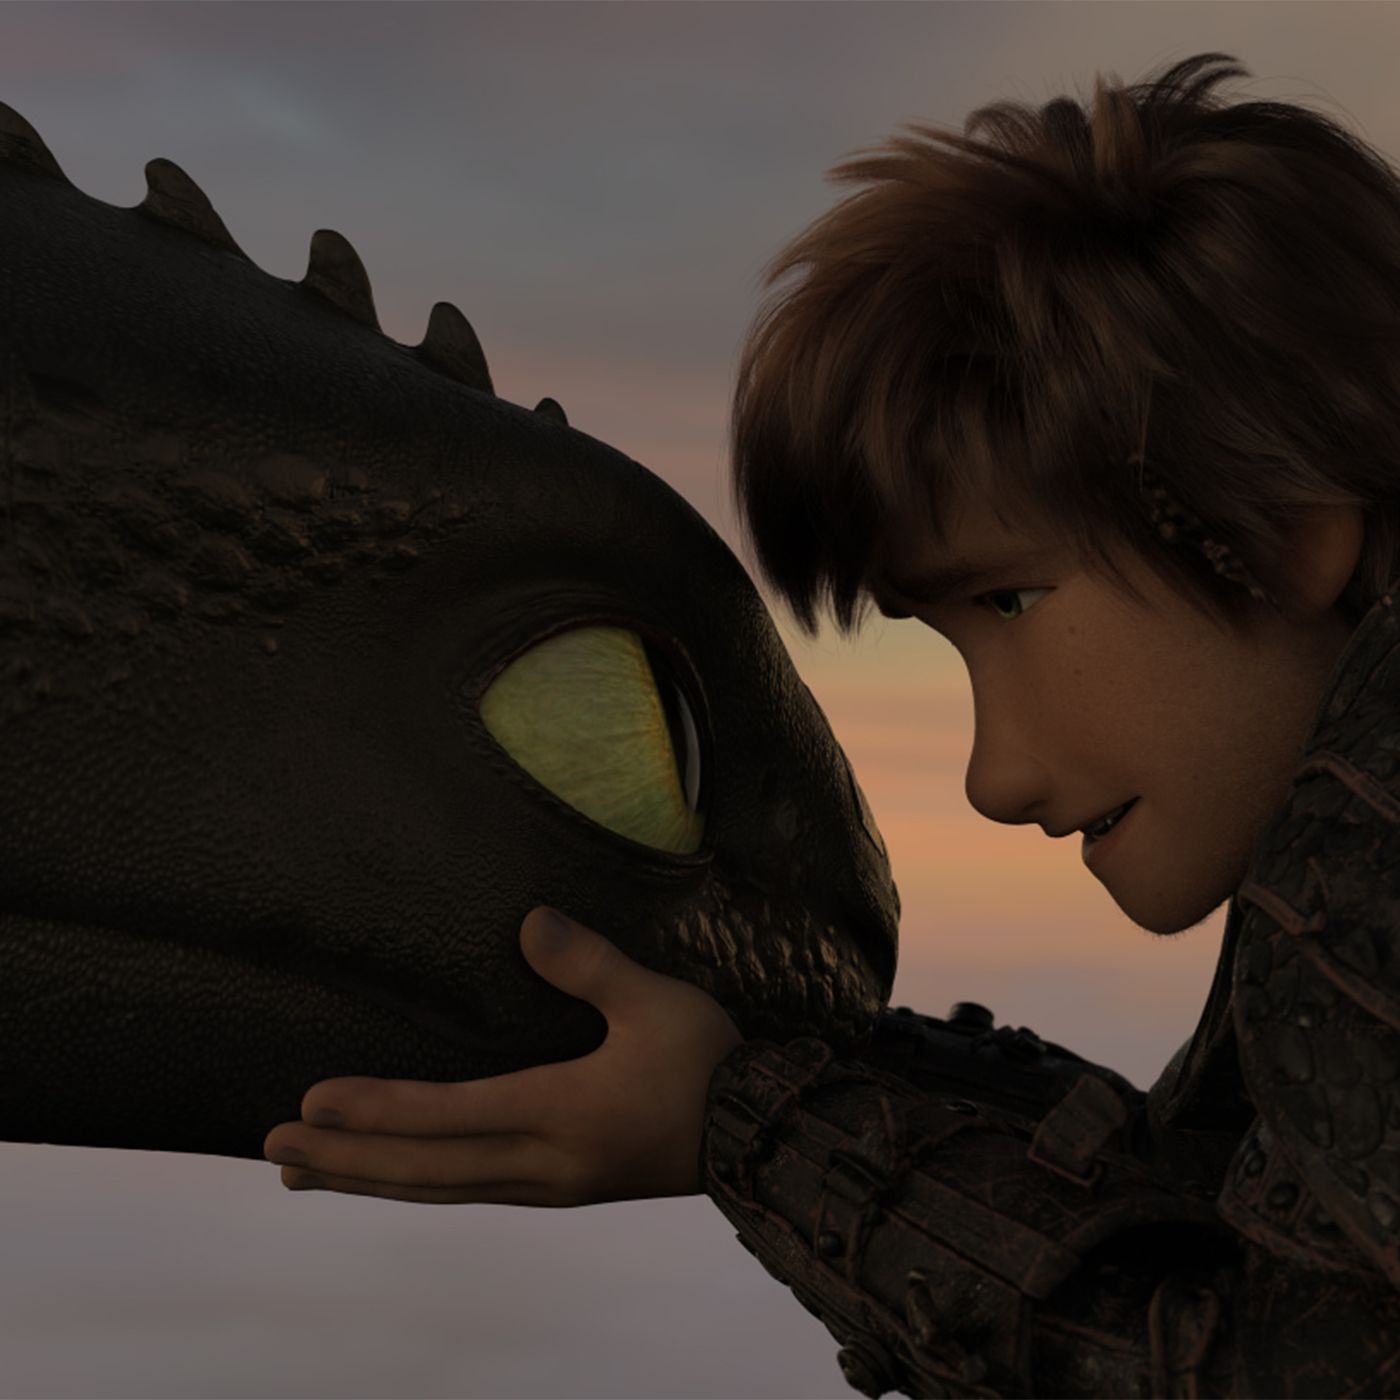 How to Train Your Dragon 3 review: a beautiful, bittersweet finale